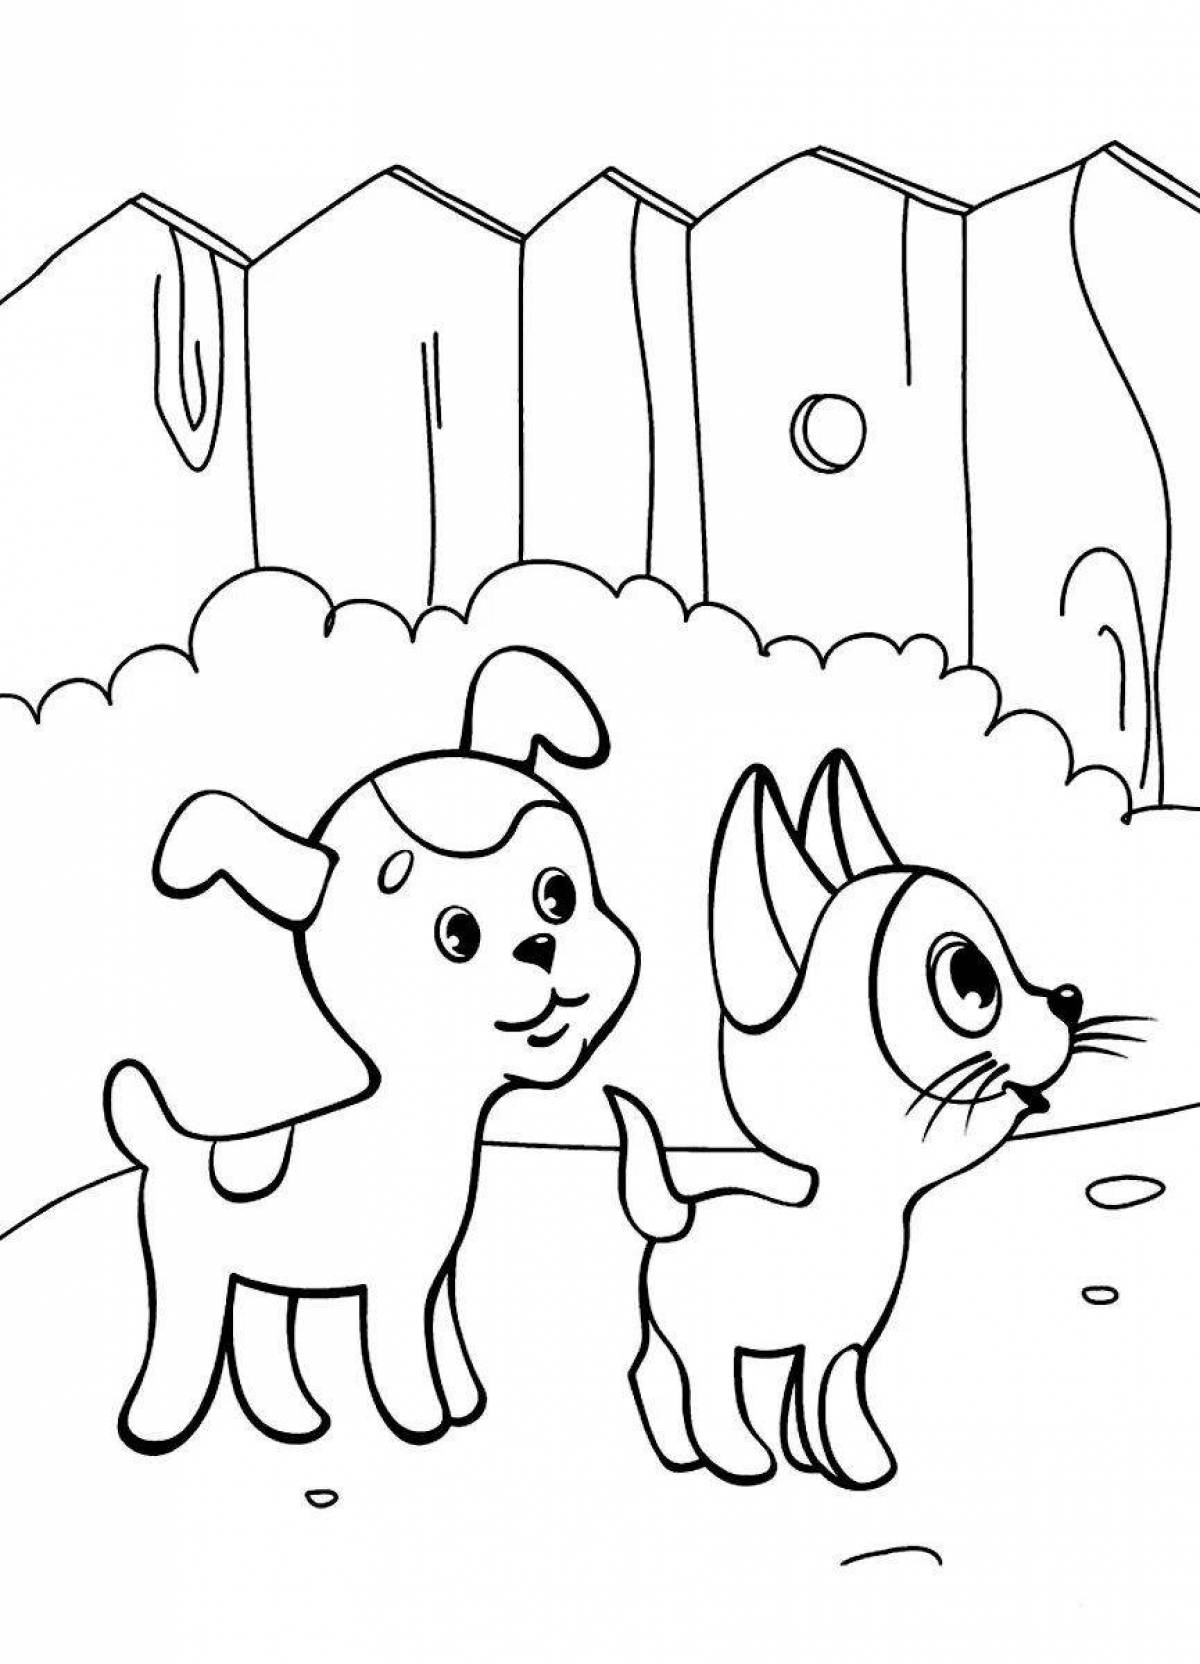 Coloring page energetic cats and dogs